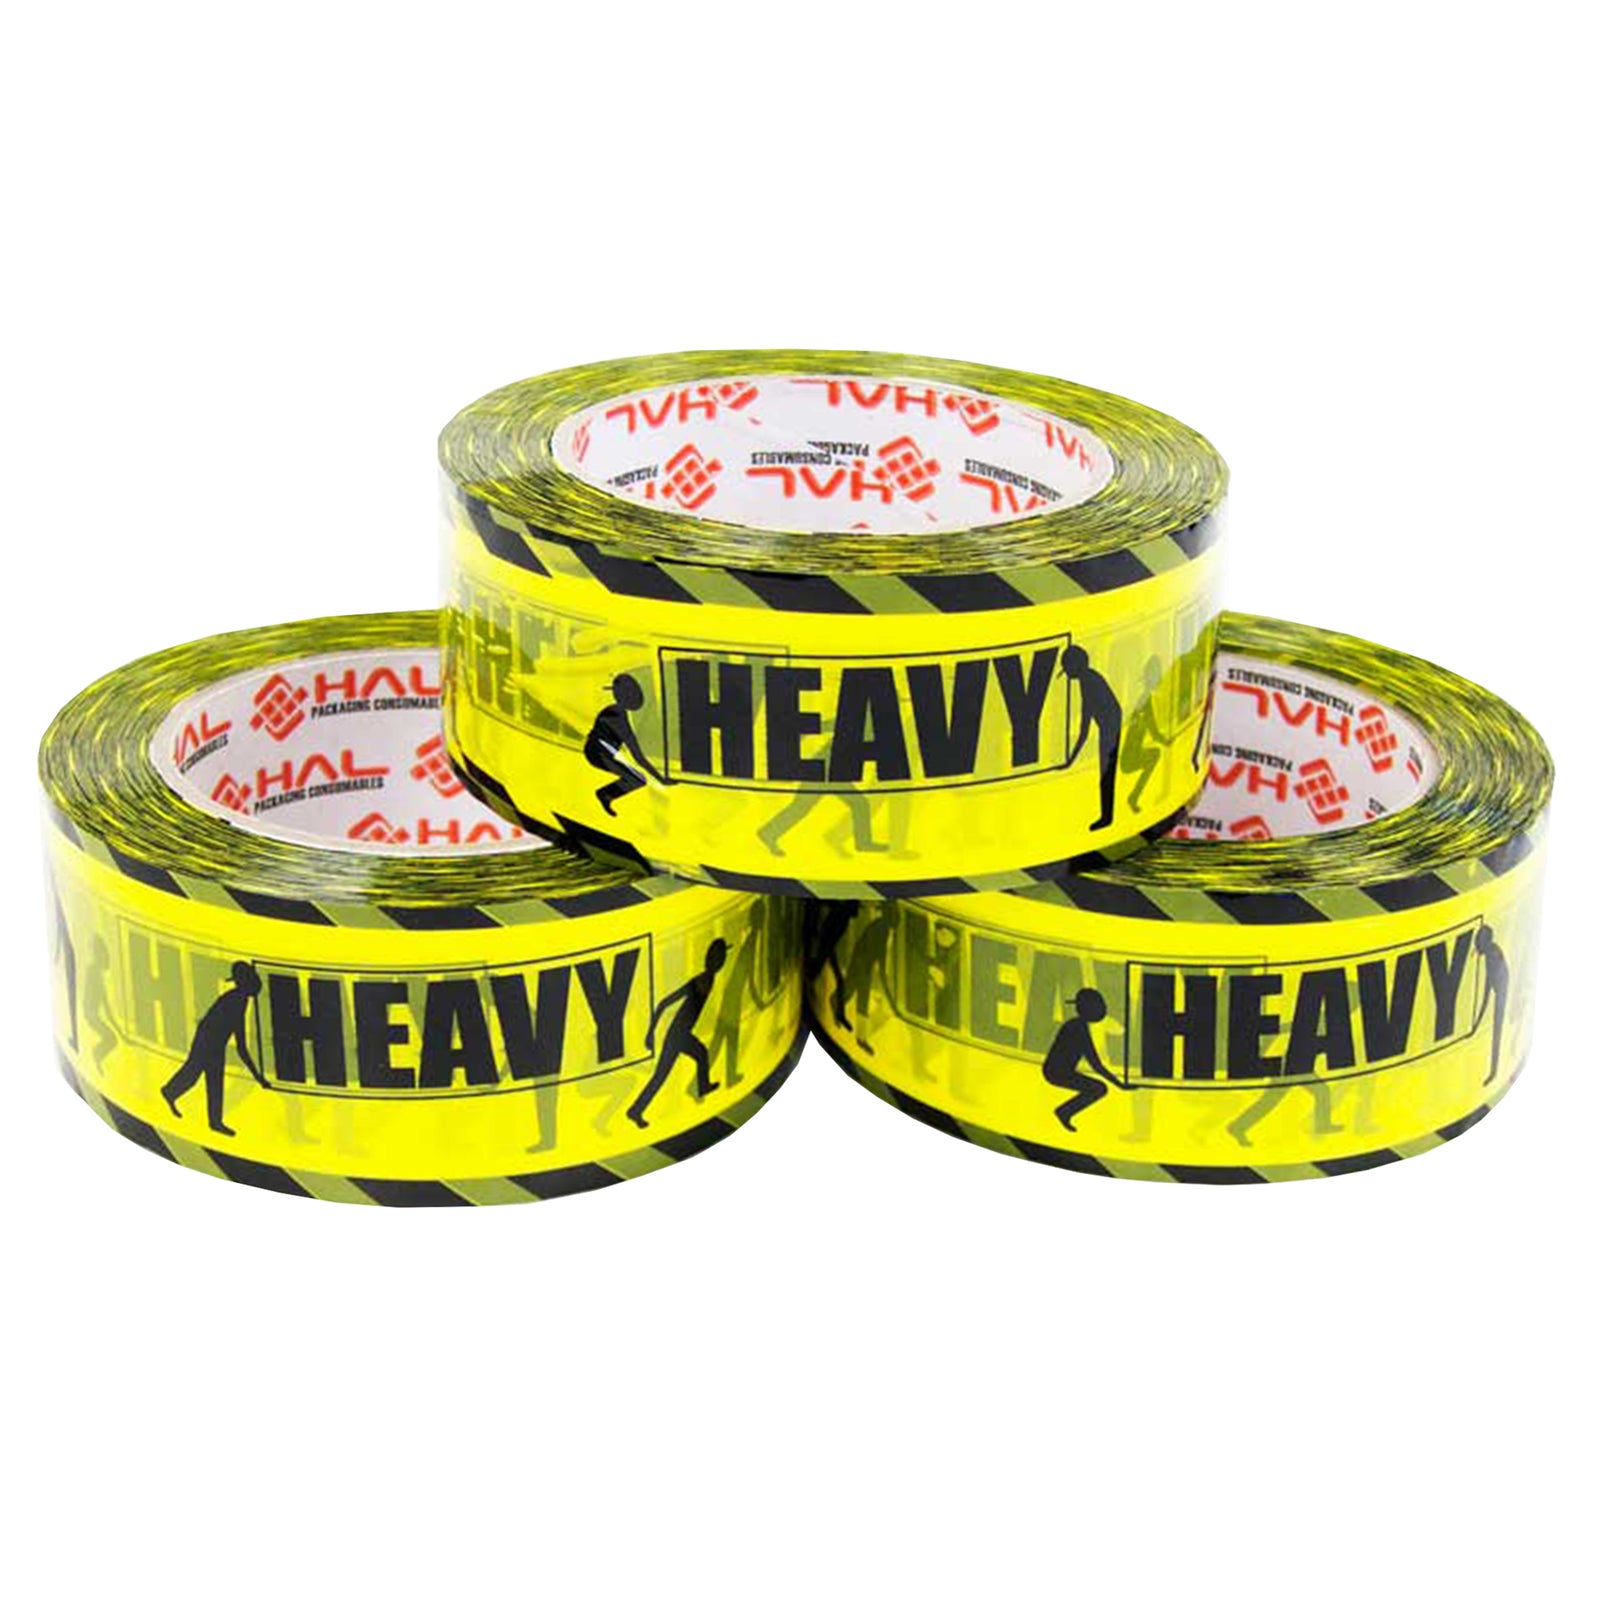 group of three yellow and black printed packaging tape with two men figures holding a heavy sign